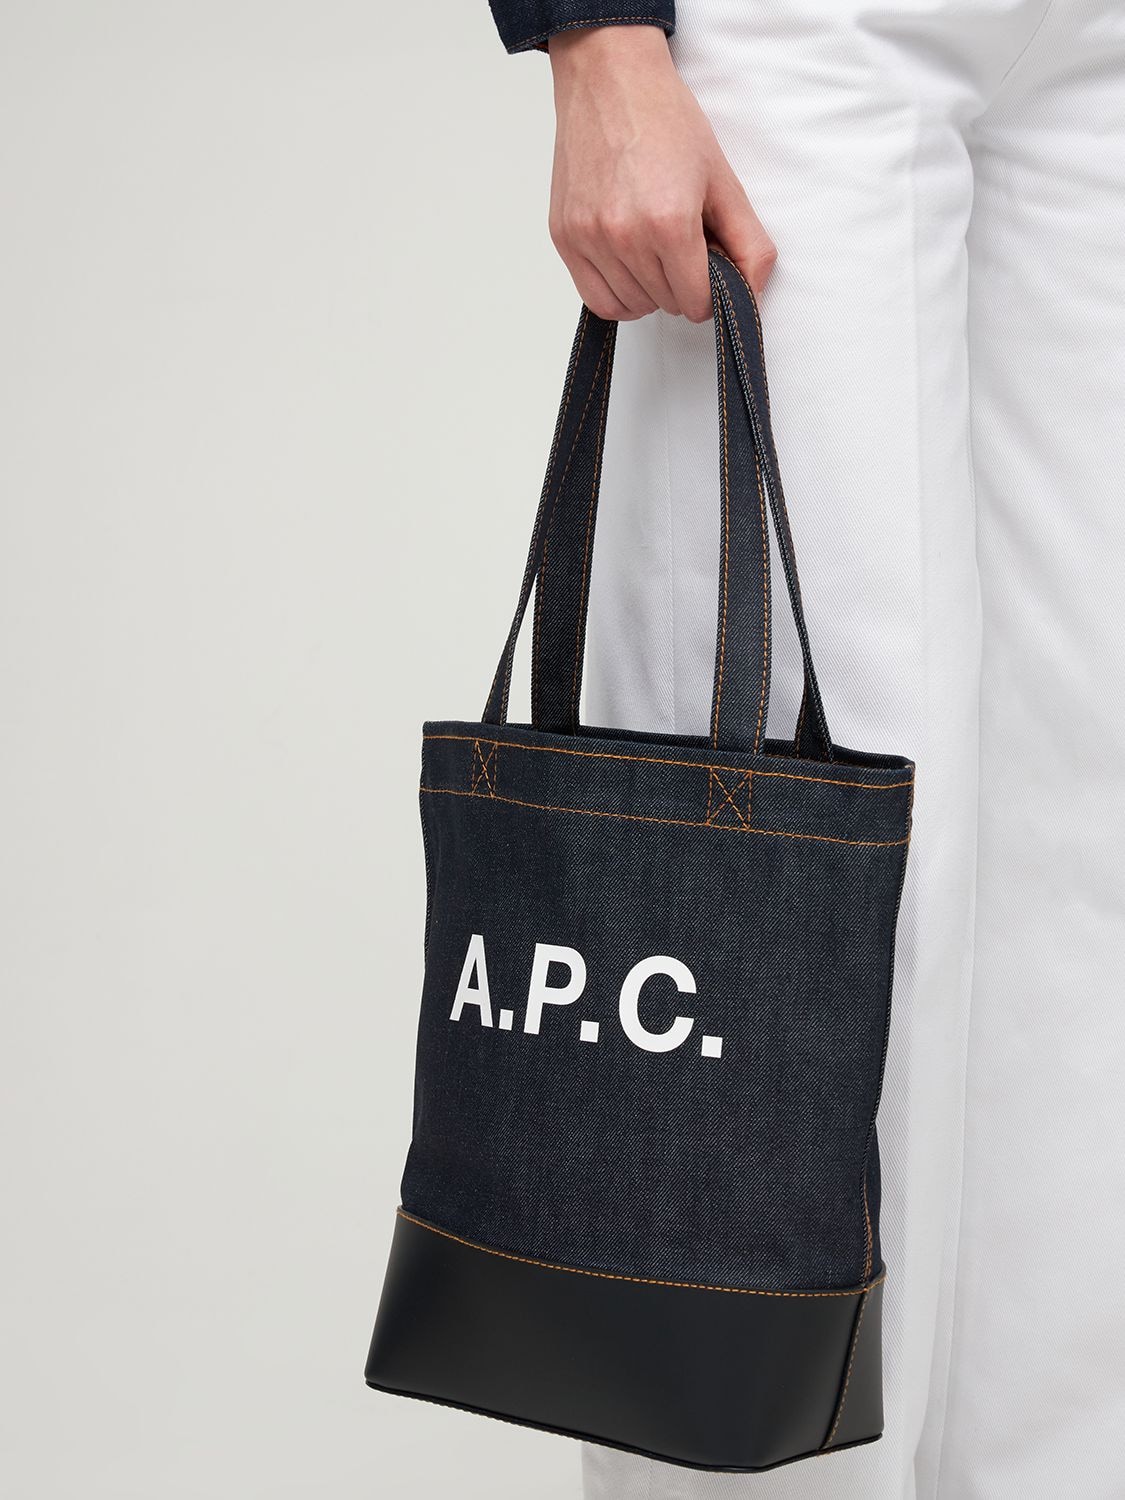 A.P.C.のトートバッグ レザー・キャンバスの選択肢 | Coordinate Graph